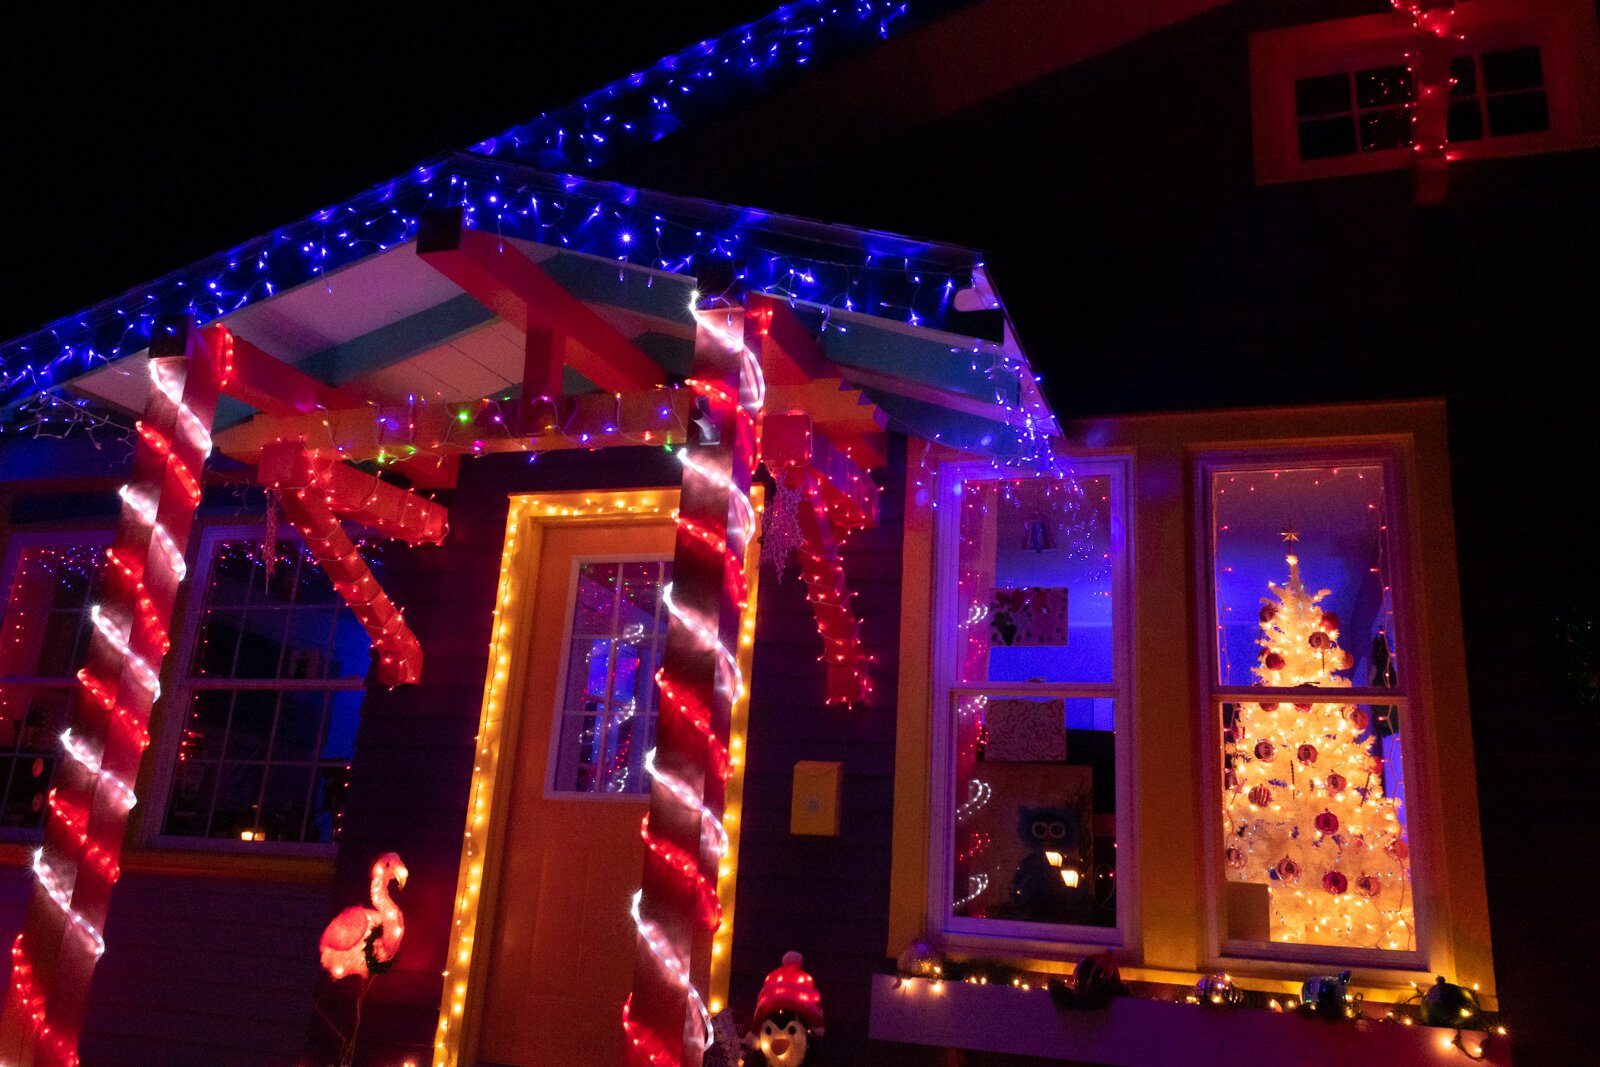 Mark Everett's home is decked out for the holidays at 4429 Pembroke Ln.